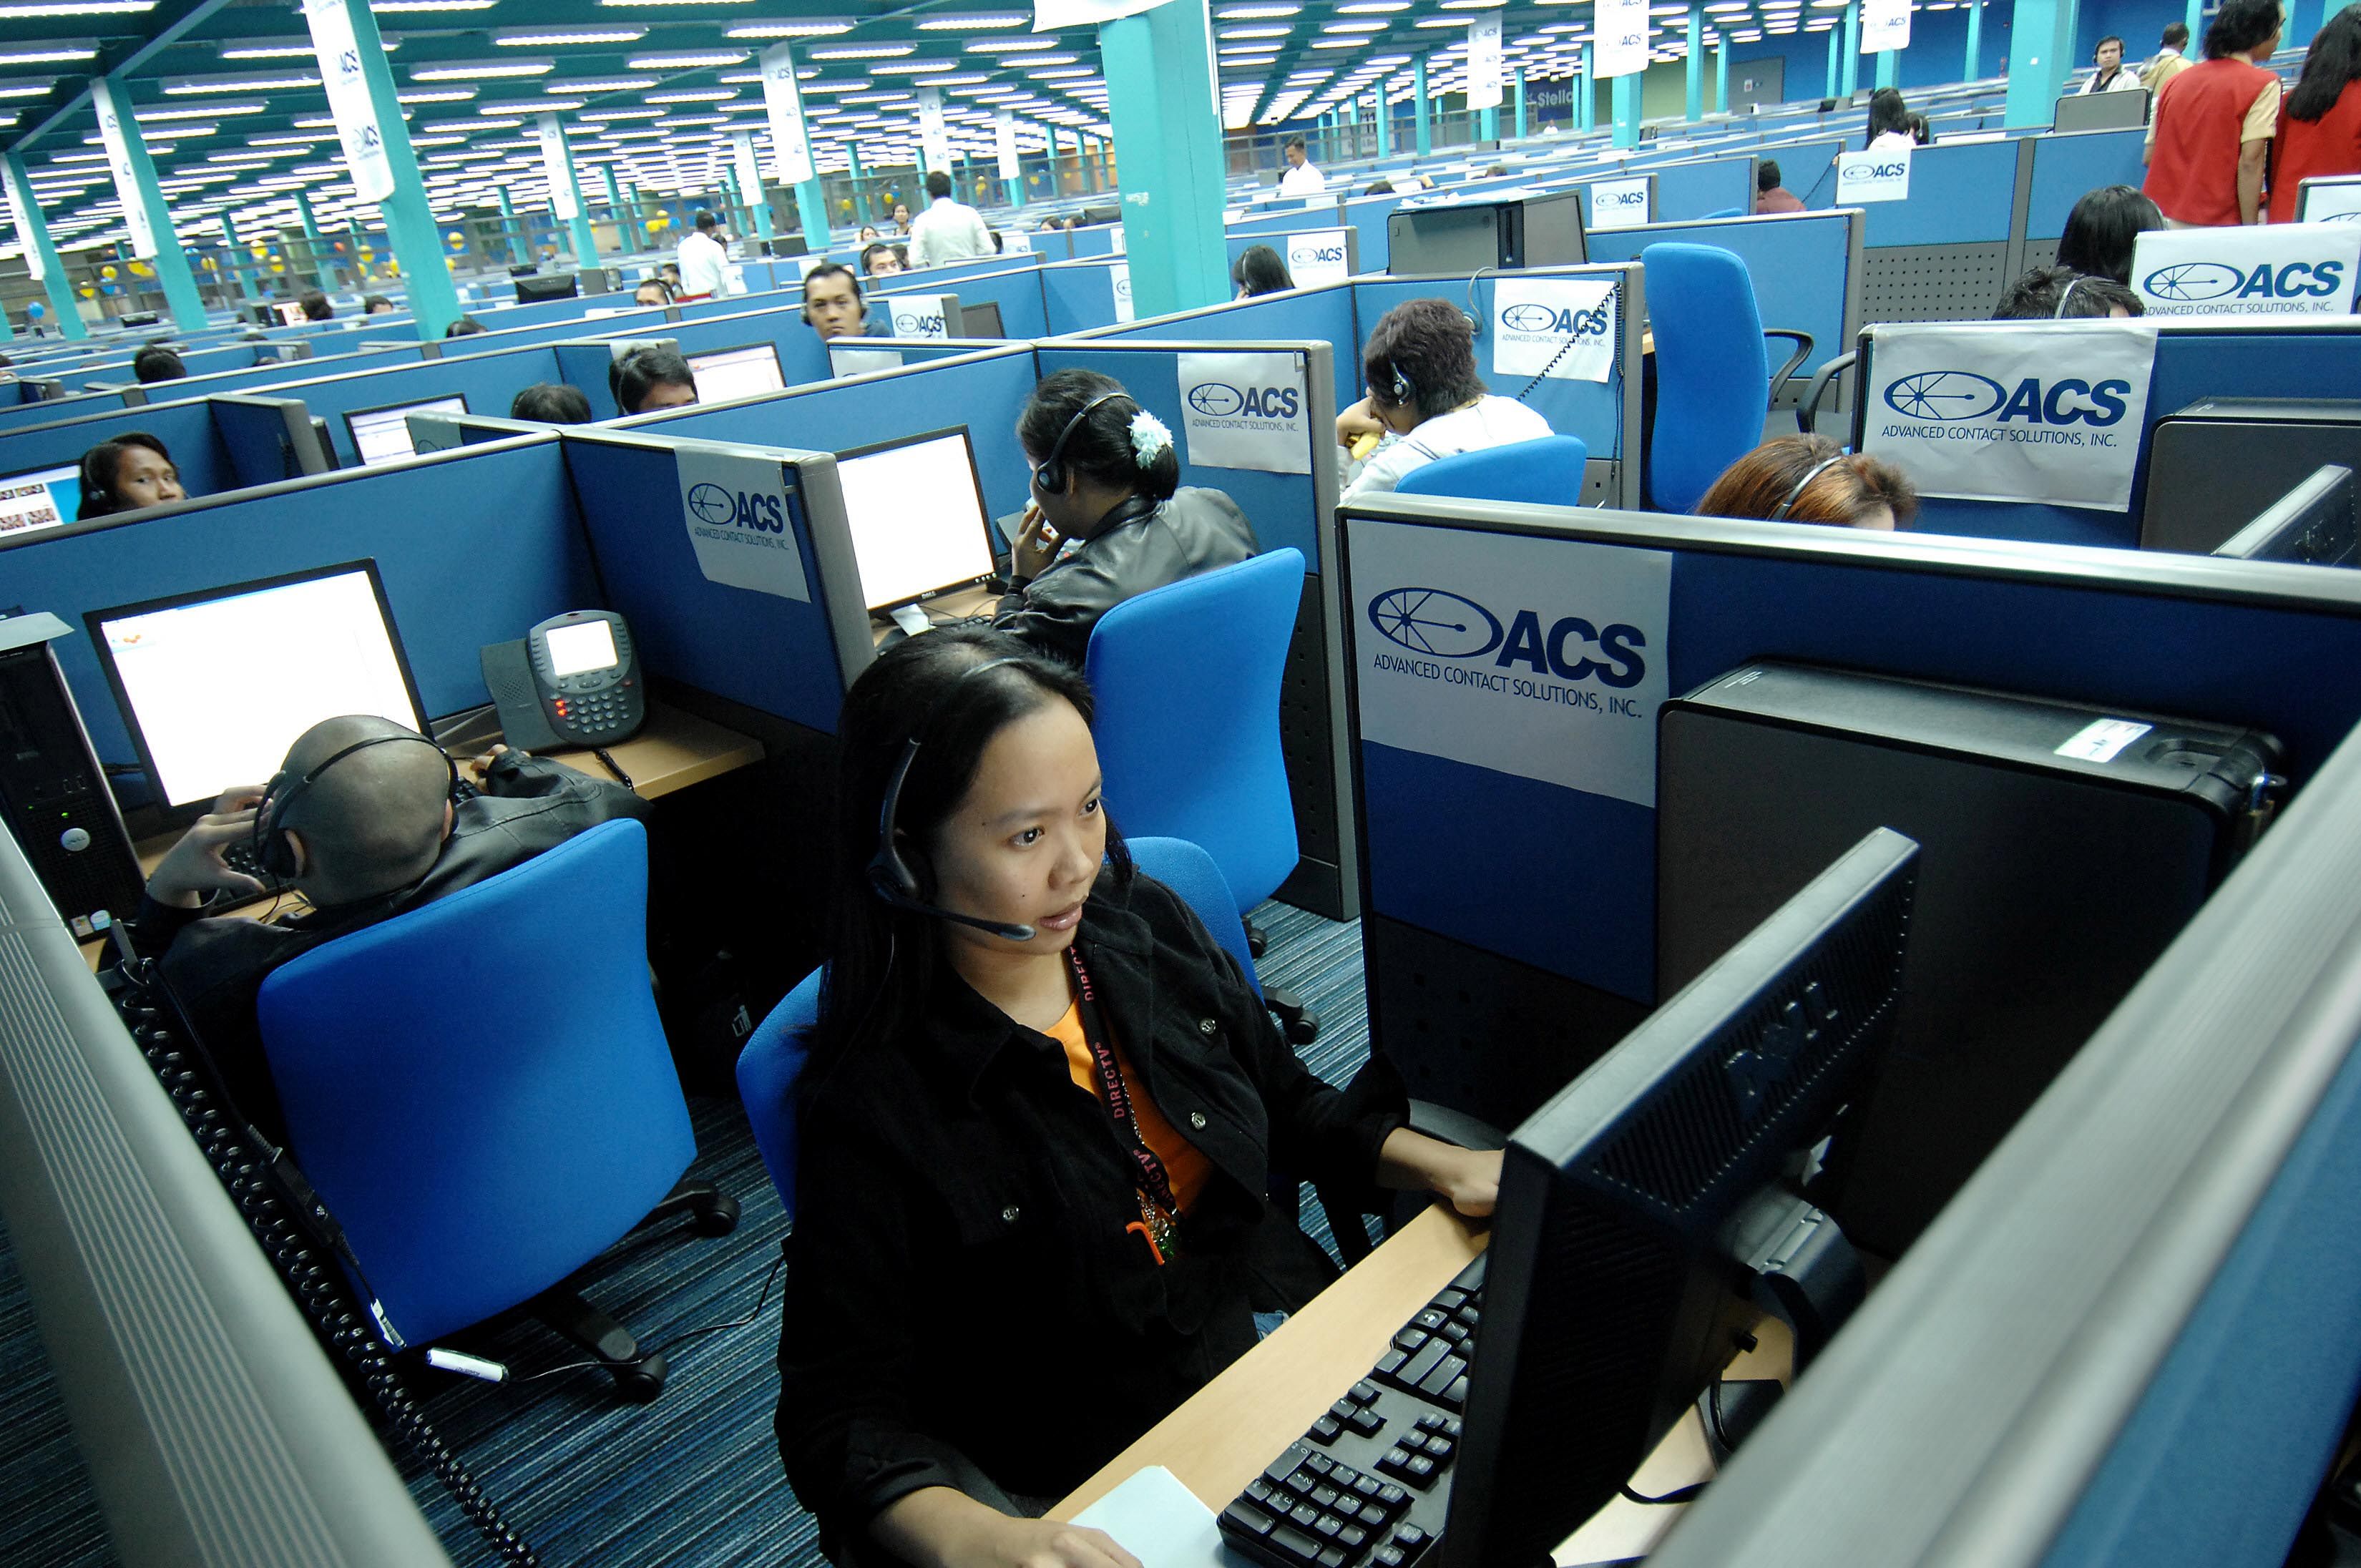 Filipino call centre agents attend to US clients at a facility in Quezon City, suburban Manila. File photo: AFP